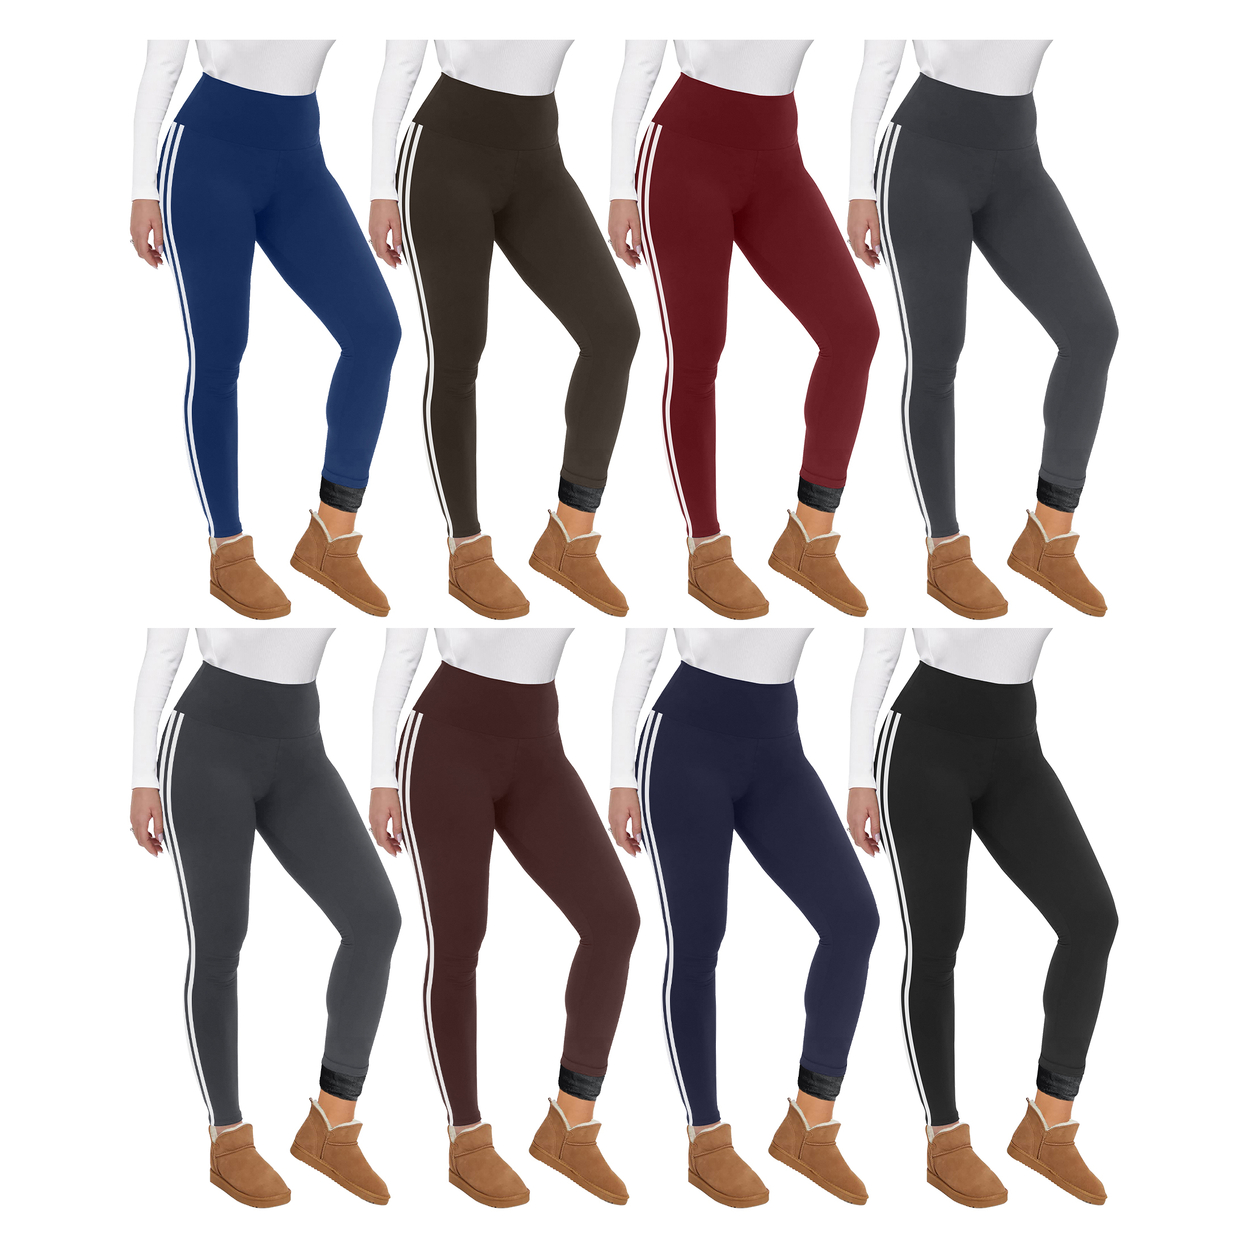 4-Pack: Women's Ultra Soft Winter Warm Cozy Striped Fur Lined Yoga Leggings - Assorted, X-large